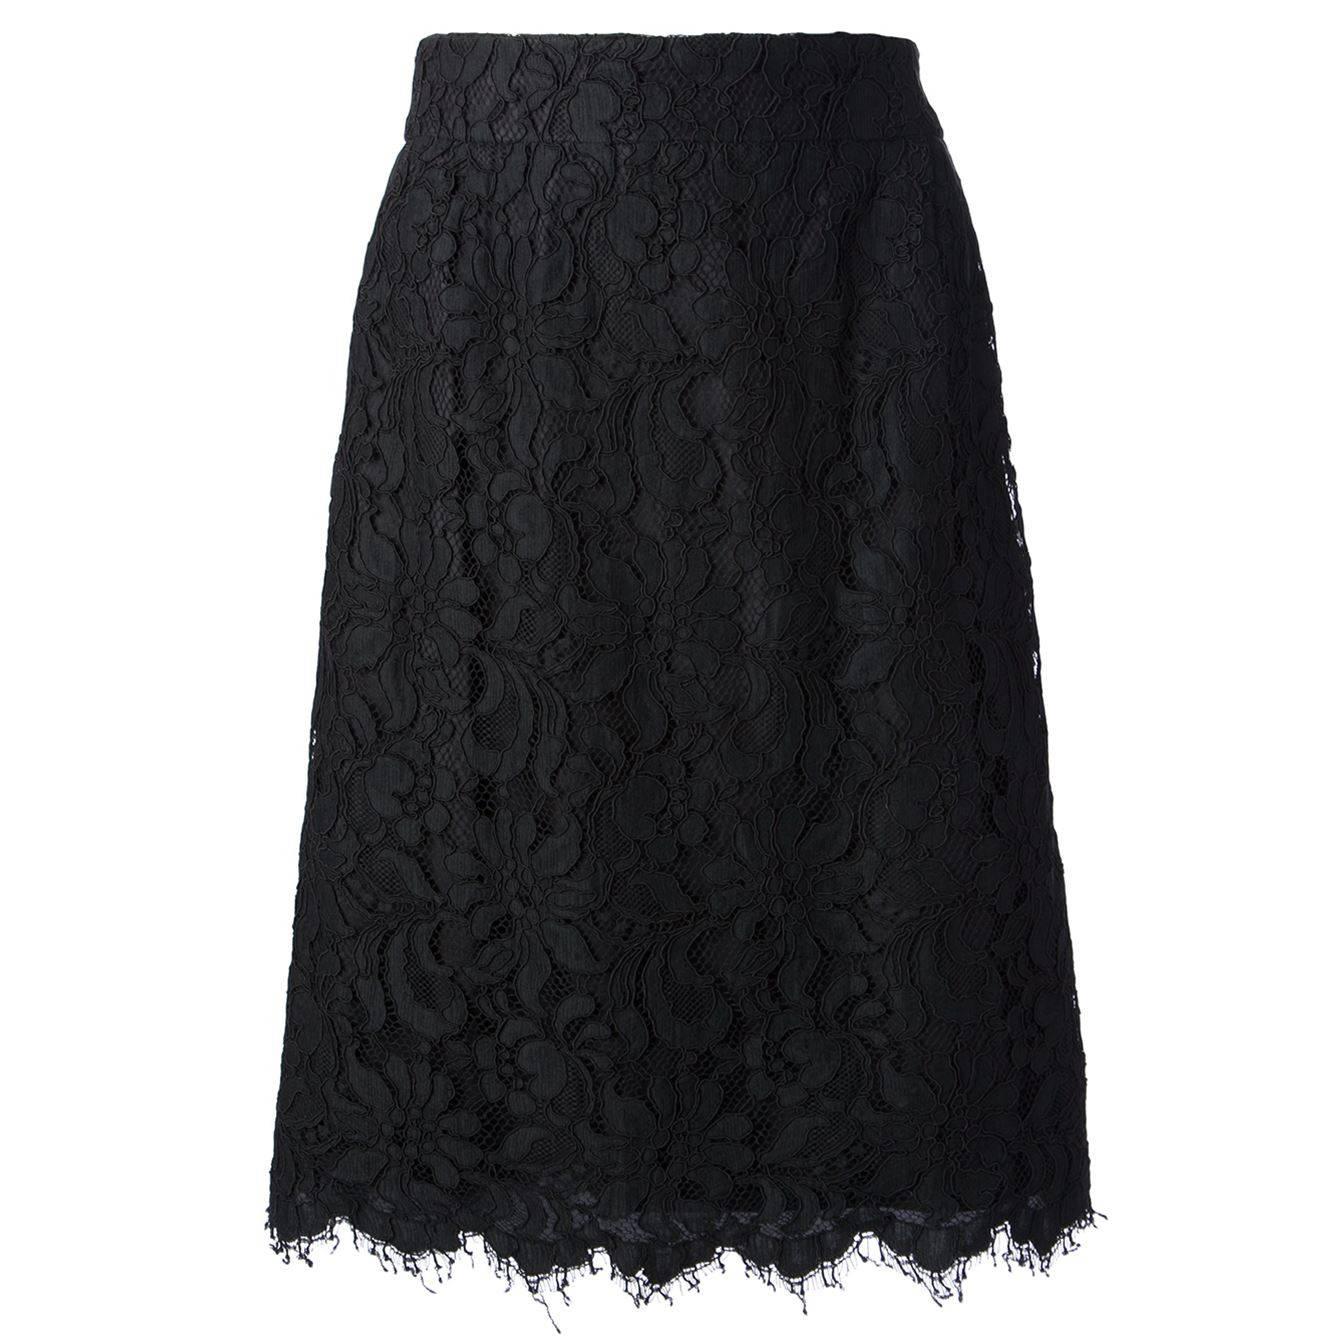 Christian Lacroix from the Suzy Menkes Collection Floral Lace Skirt at ...